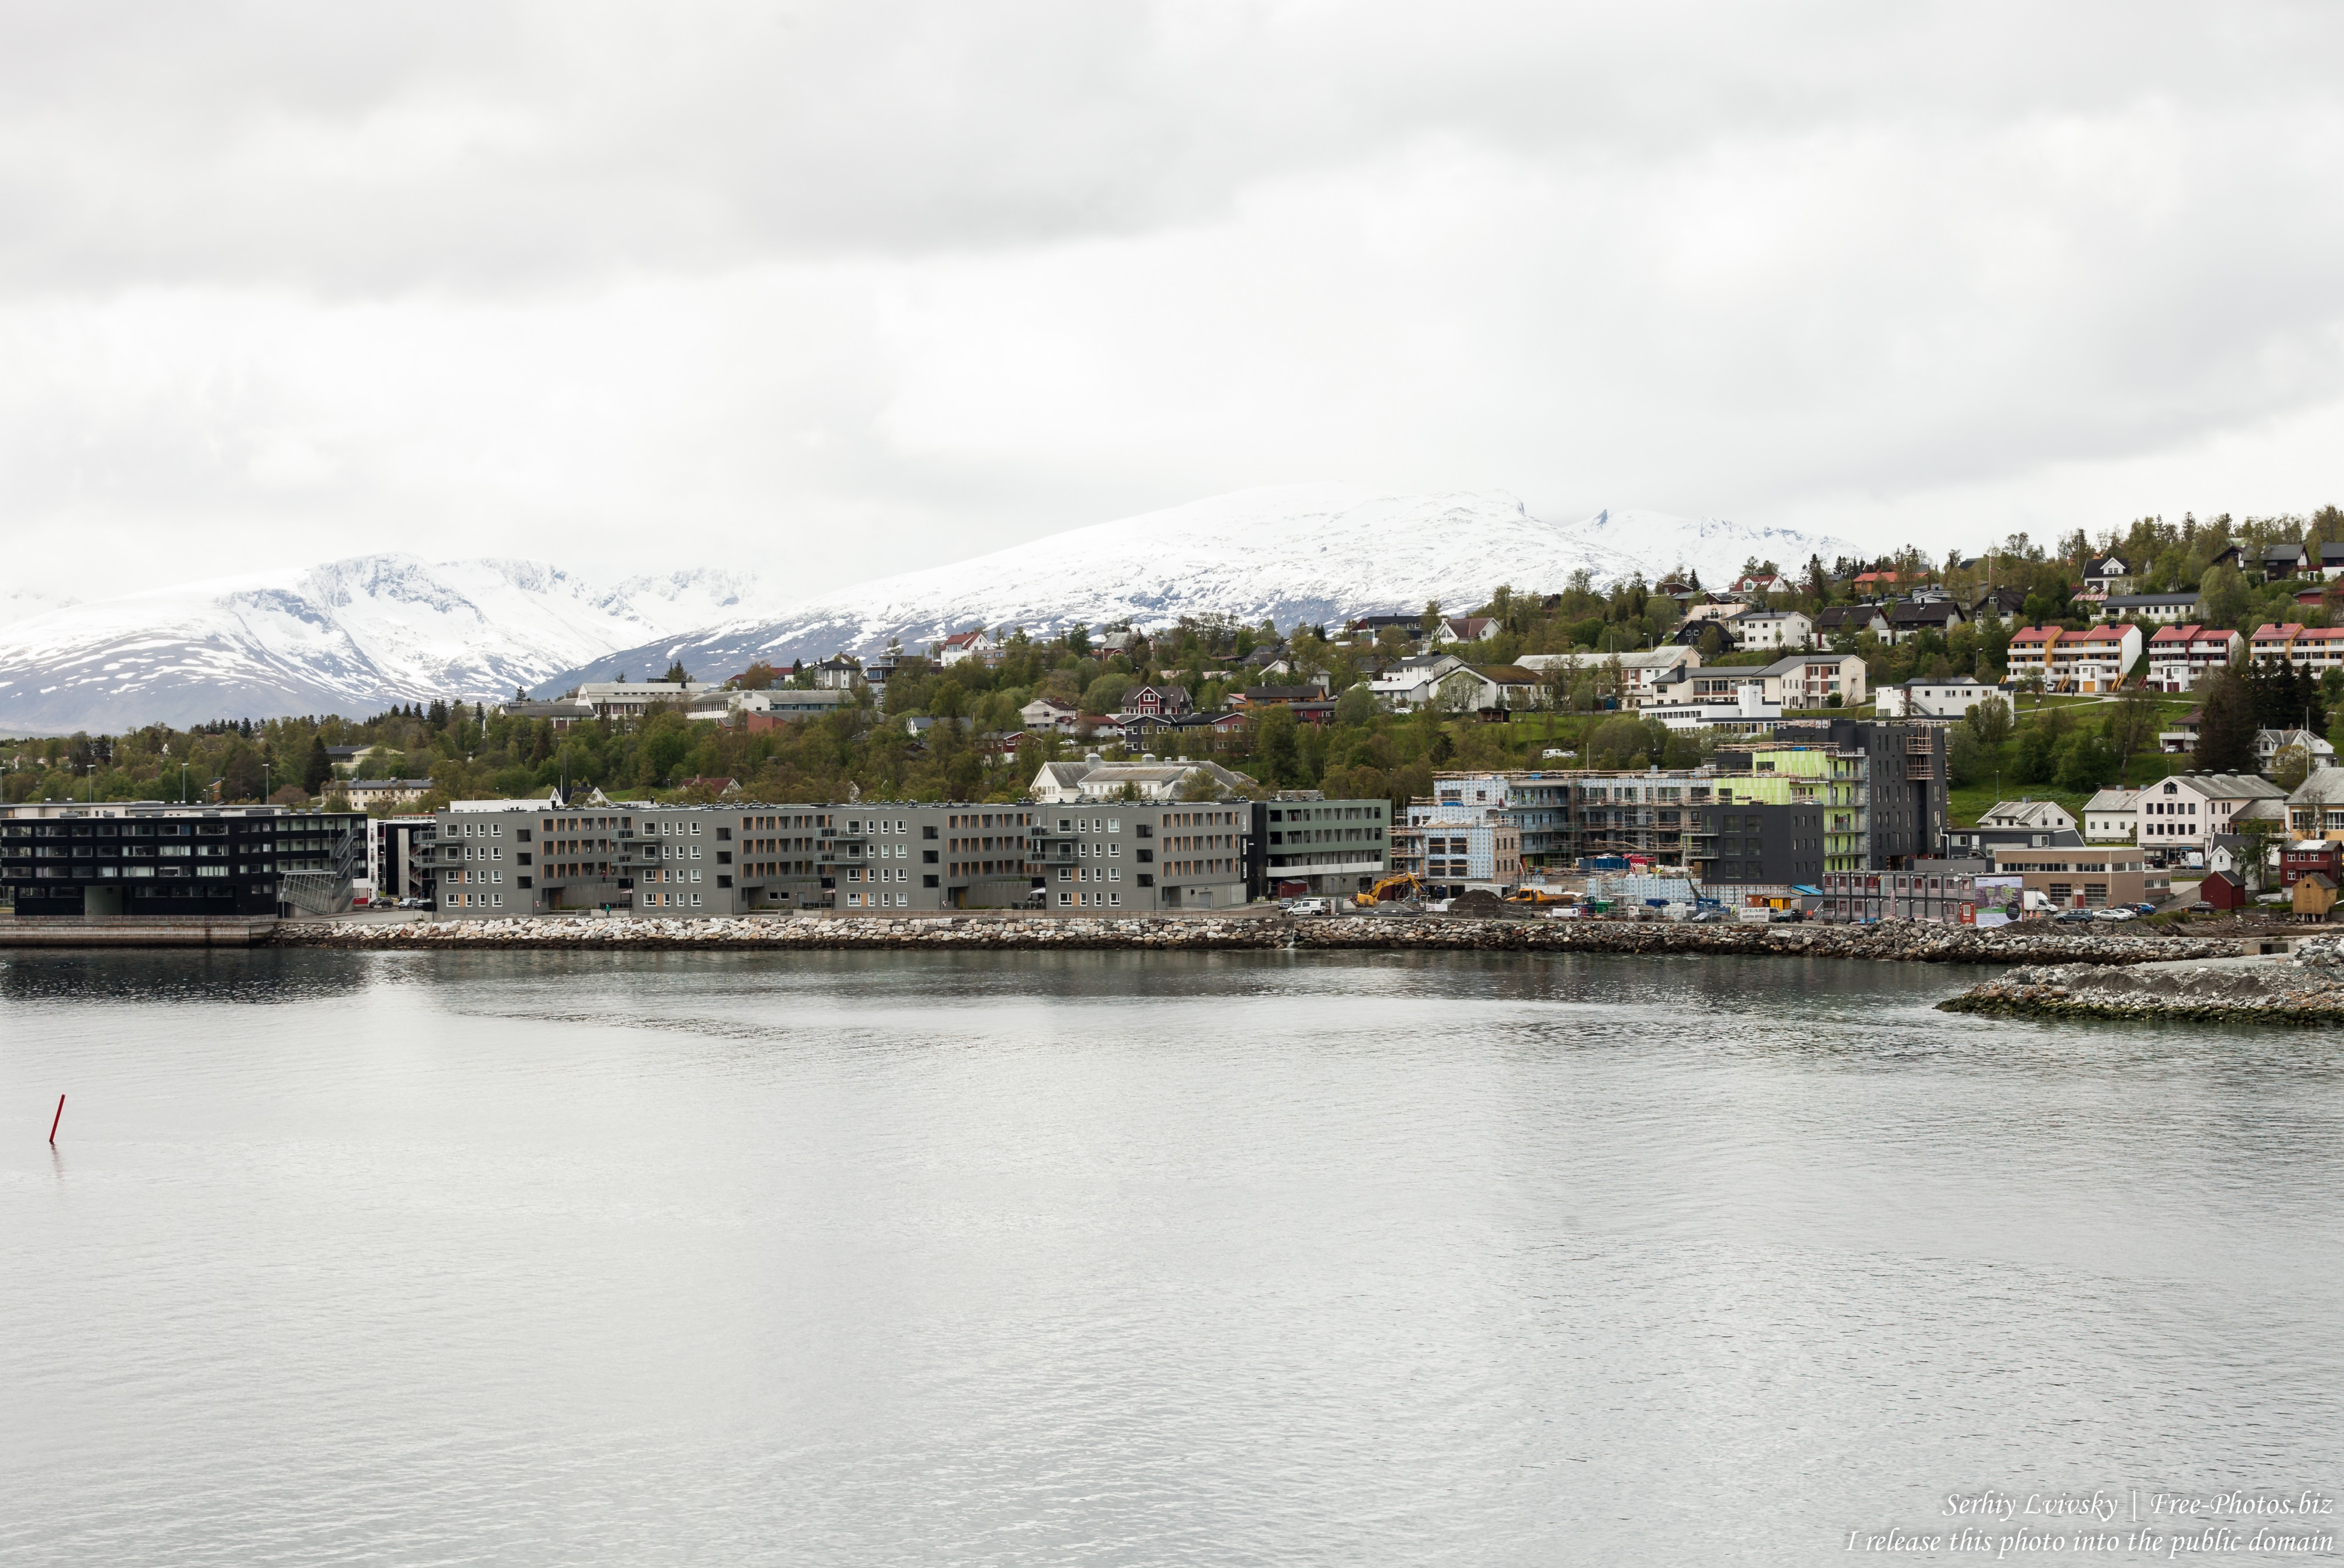 Tromso, Norway, photographed in June 2018 by Serhiy Lvivsky, picture 29